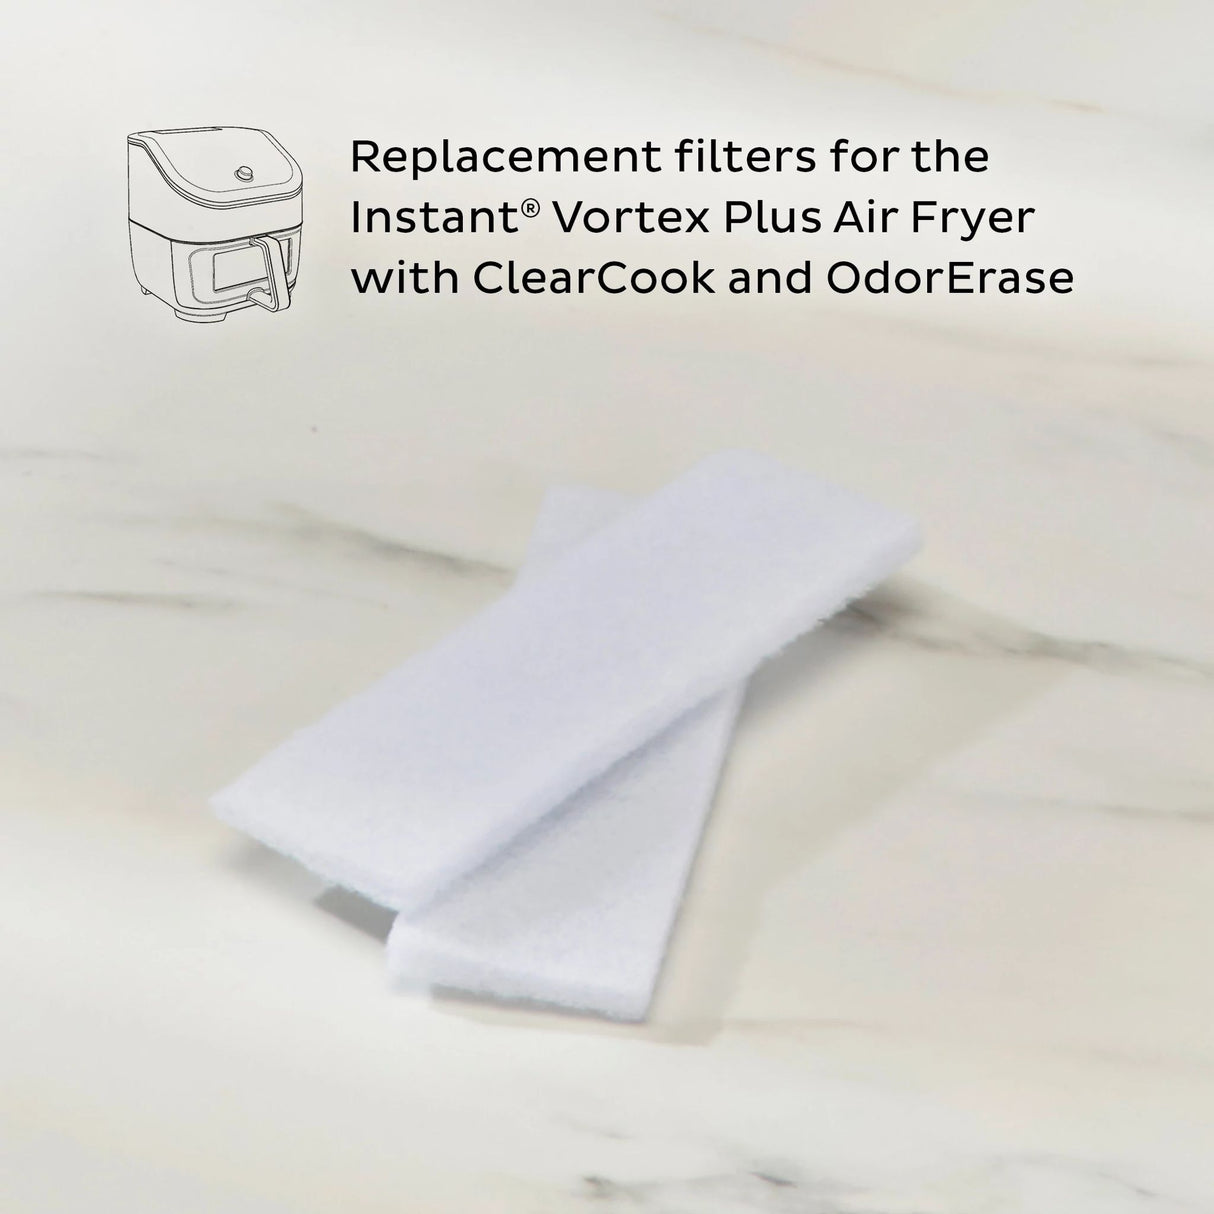  Vortex™ Plus 6-quart OdorErase Air Filters with text Replacement filters for the Instant Vortex Plus Air Fryer